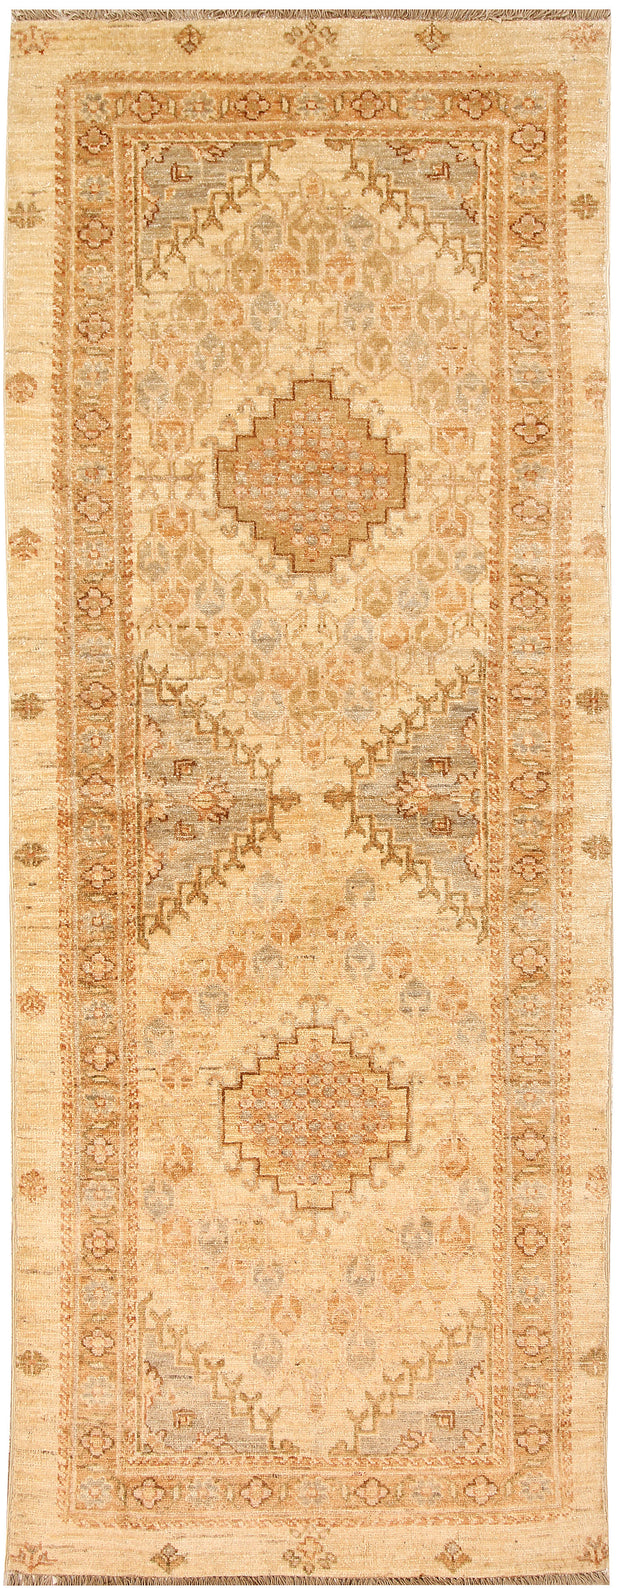 Blanched Almond Oushak 2' 7 x 6' 10 - No. 65447 - ALRUG Rug Store